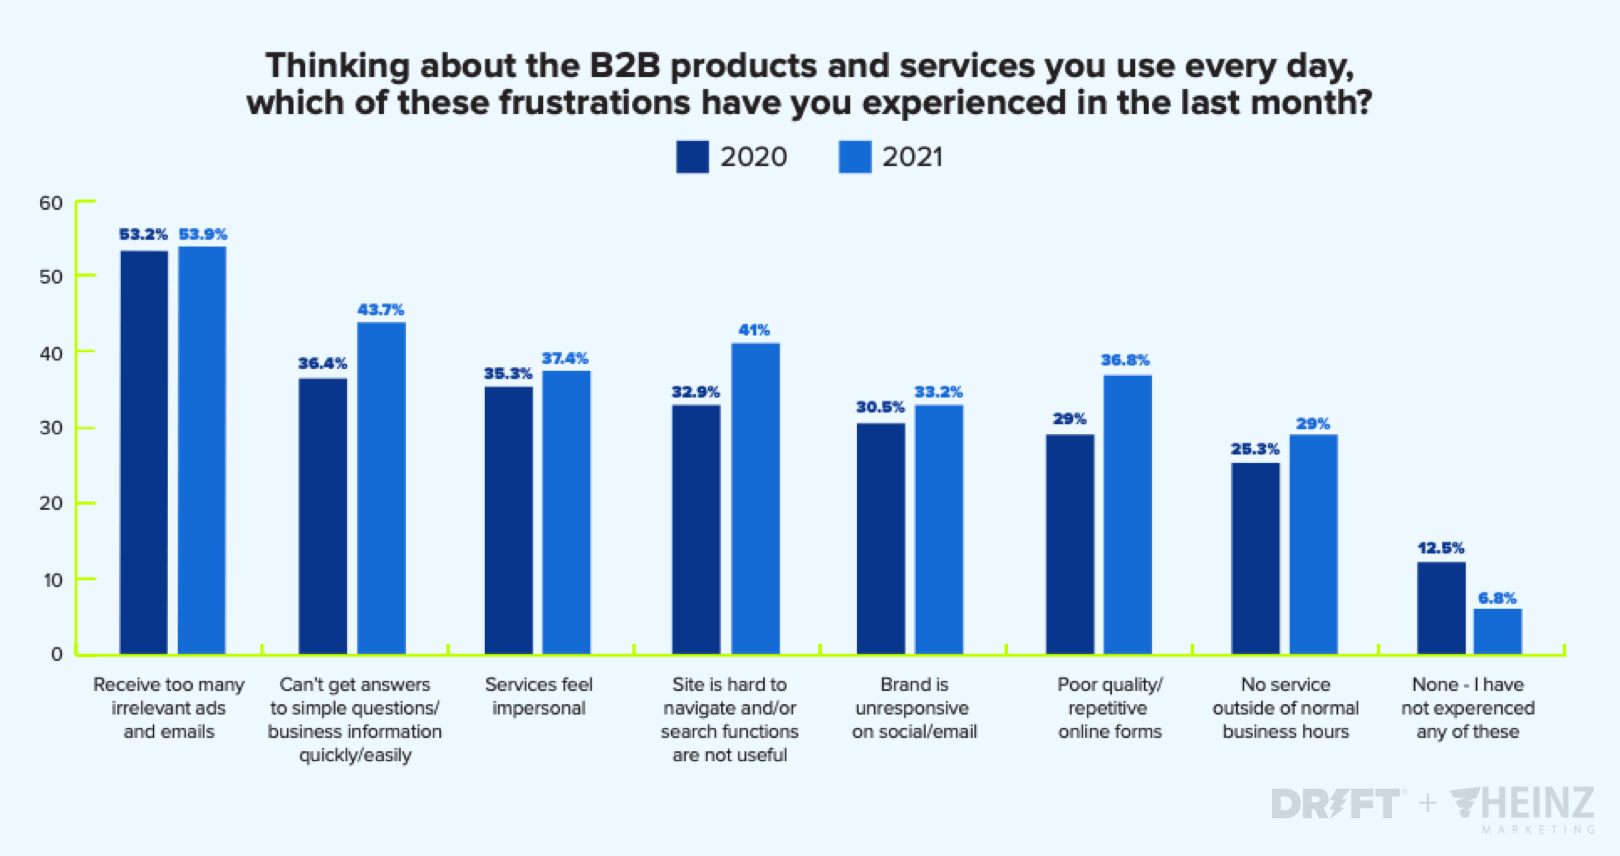 B2B buyer frustrations are at an all-time high